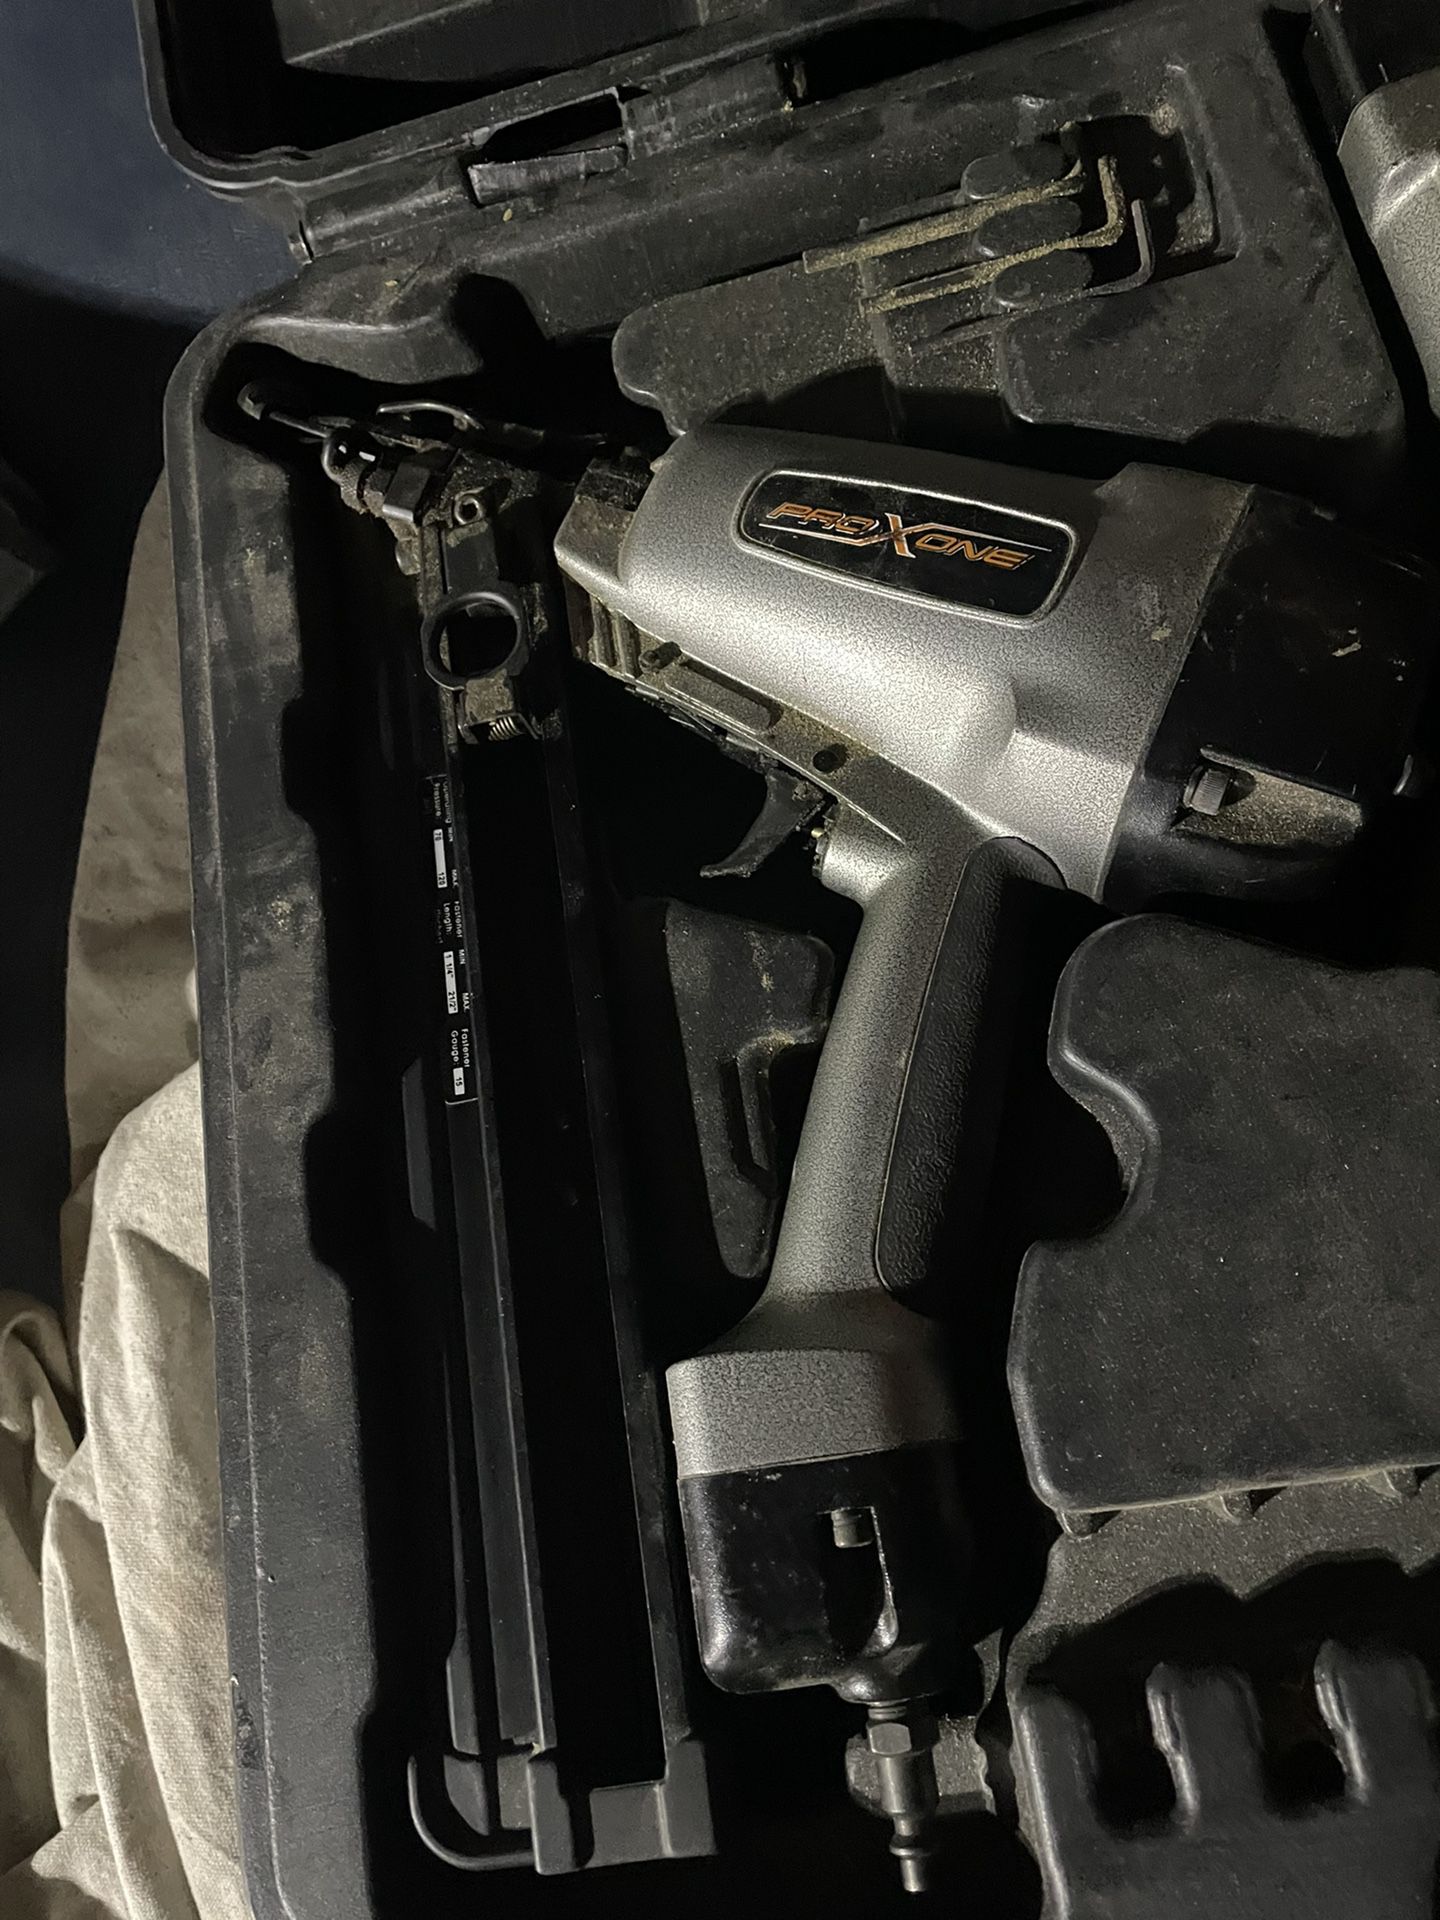 Black & Decker 12 V Finish Nailer for Sale in Lakewood, WA - OfferUp